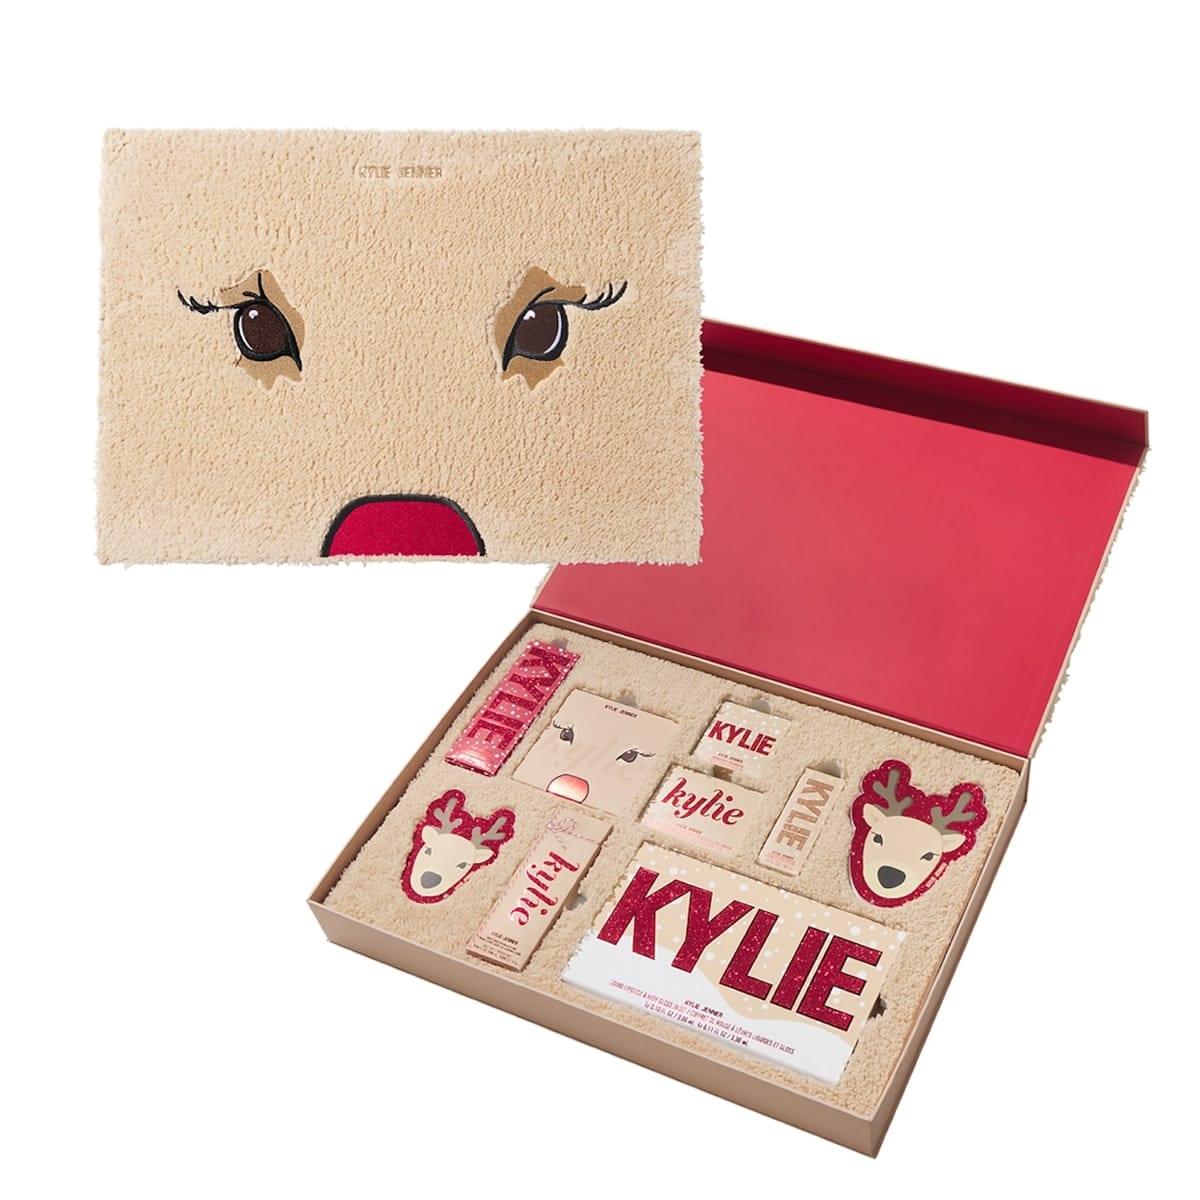 The limited edition Holiday collection includes Kylie’s best selling shades